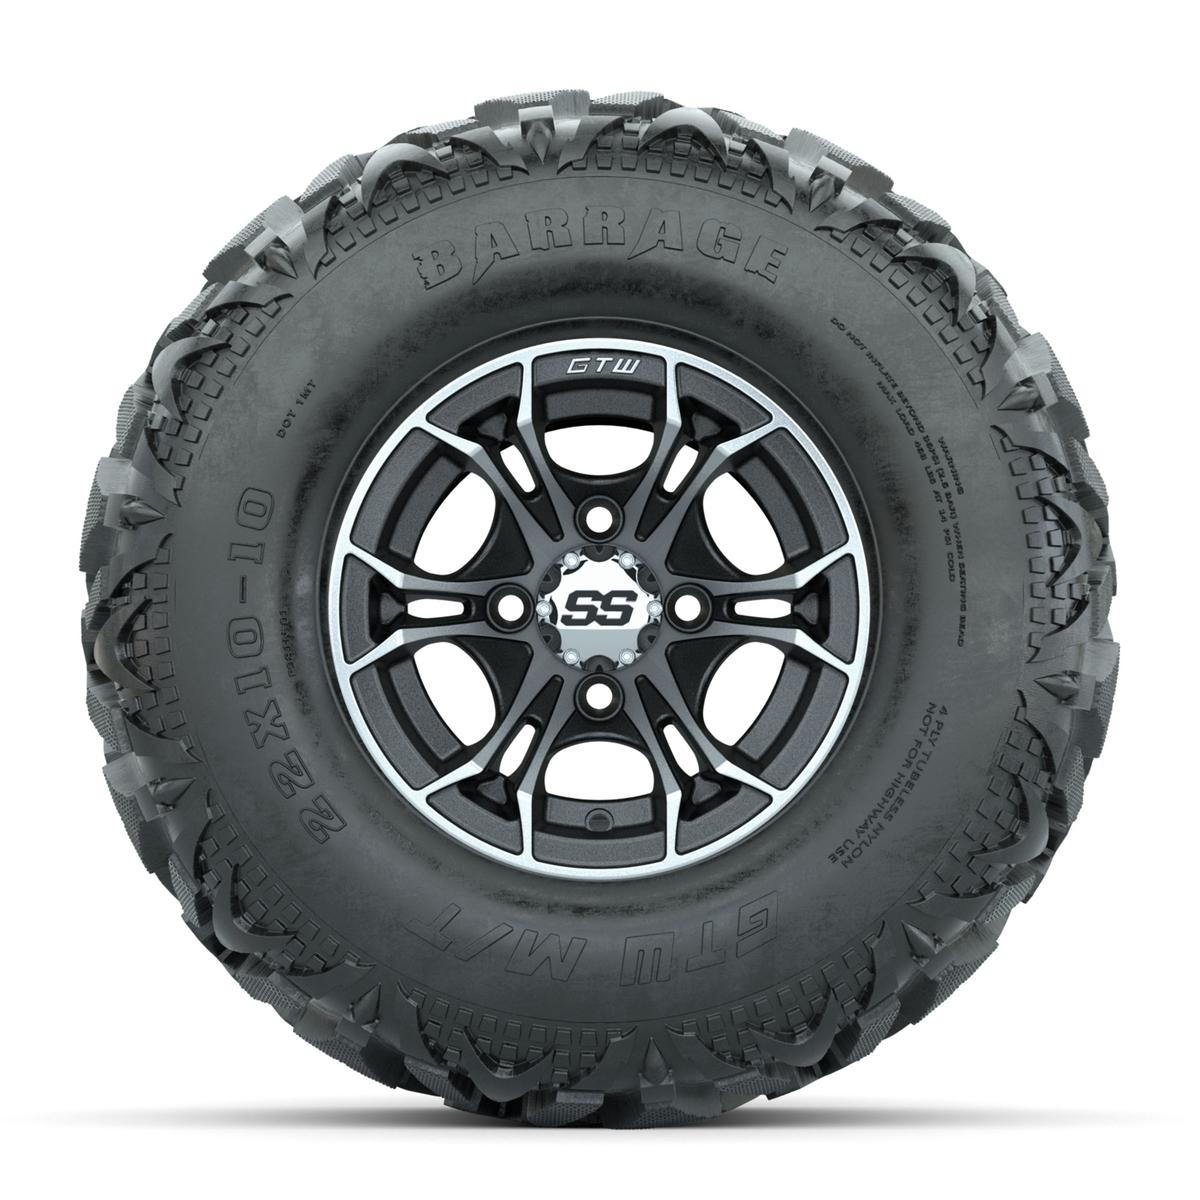 GTW Spyder Machined/Matte Grey 10 in Wheels with 22x10-10 Barrage Mud Tires – Full Set